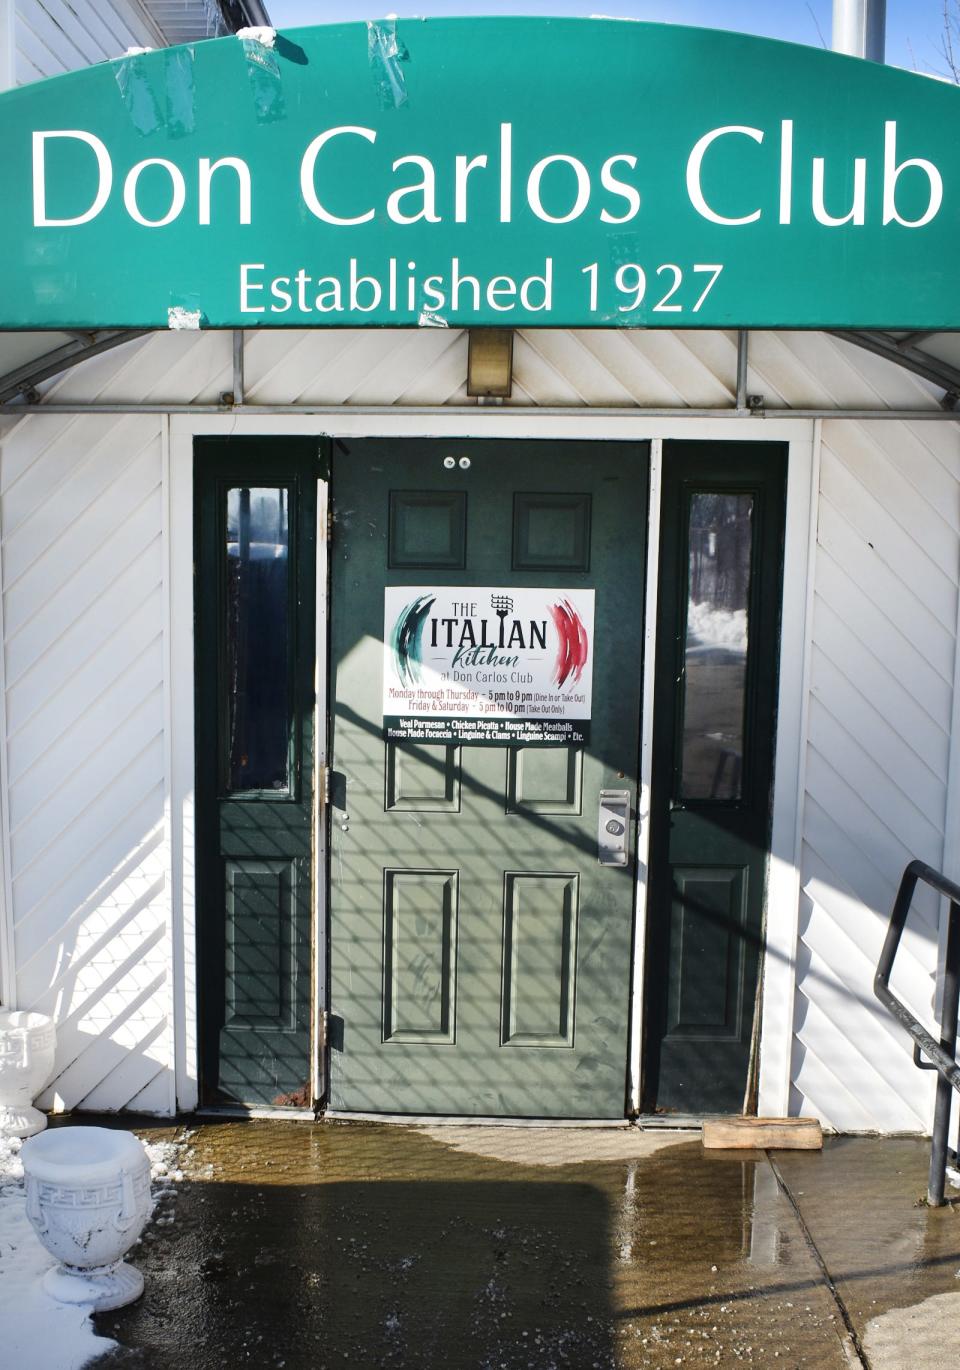 The Italian Kitchen is located in The Don Carlos Club at 245 Plain St., Fall River.